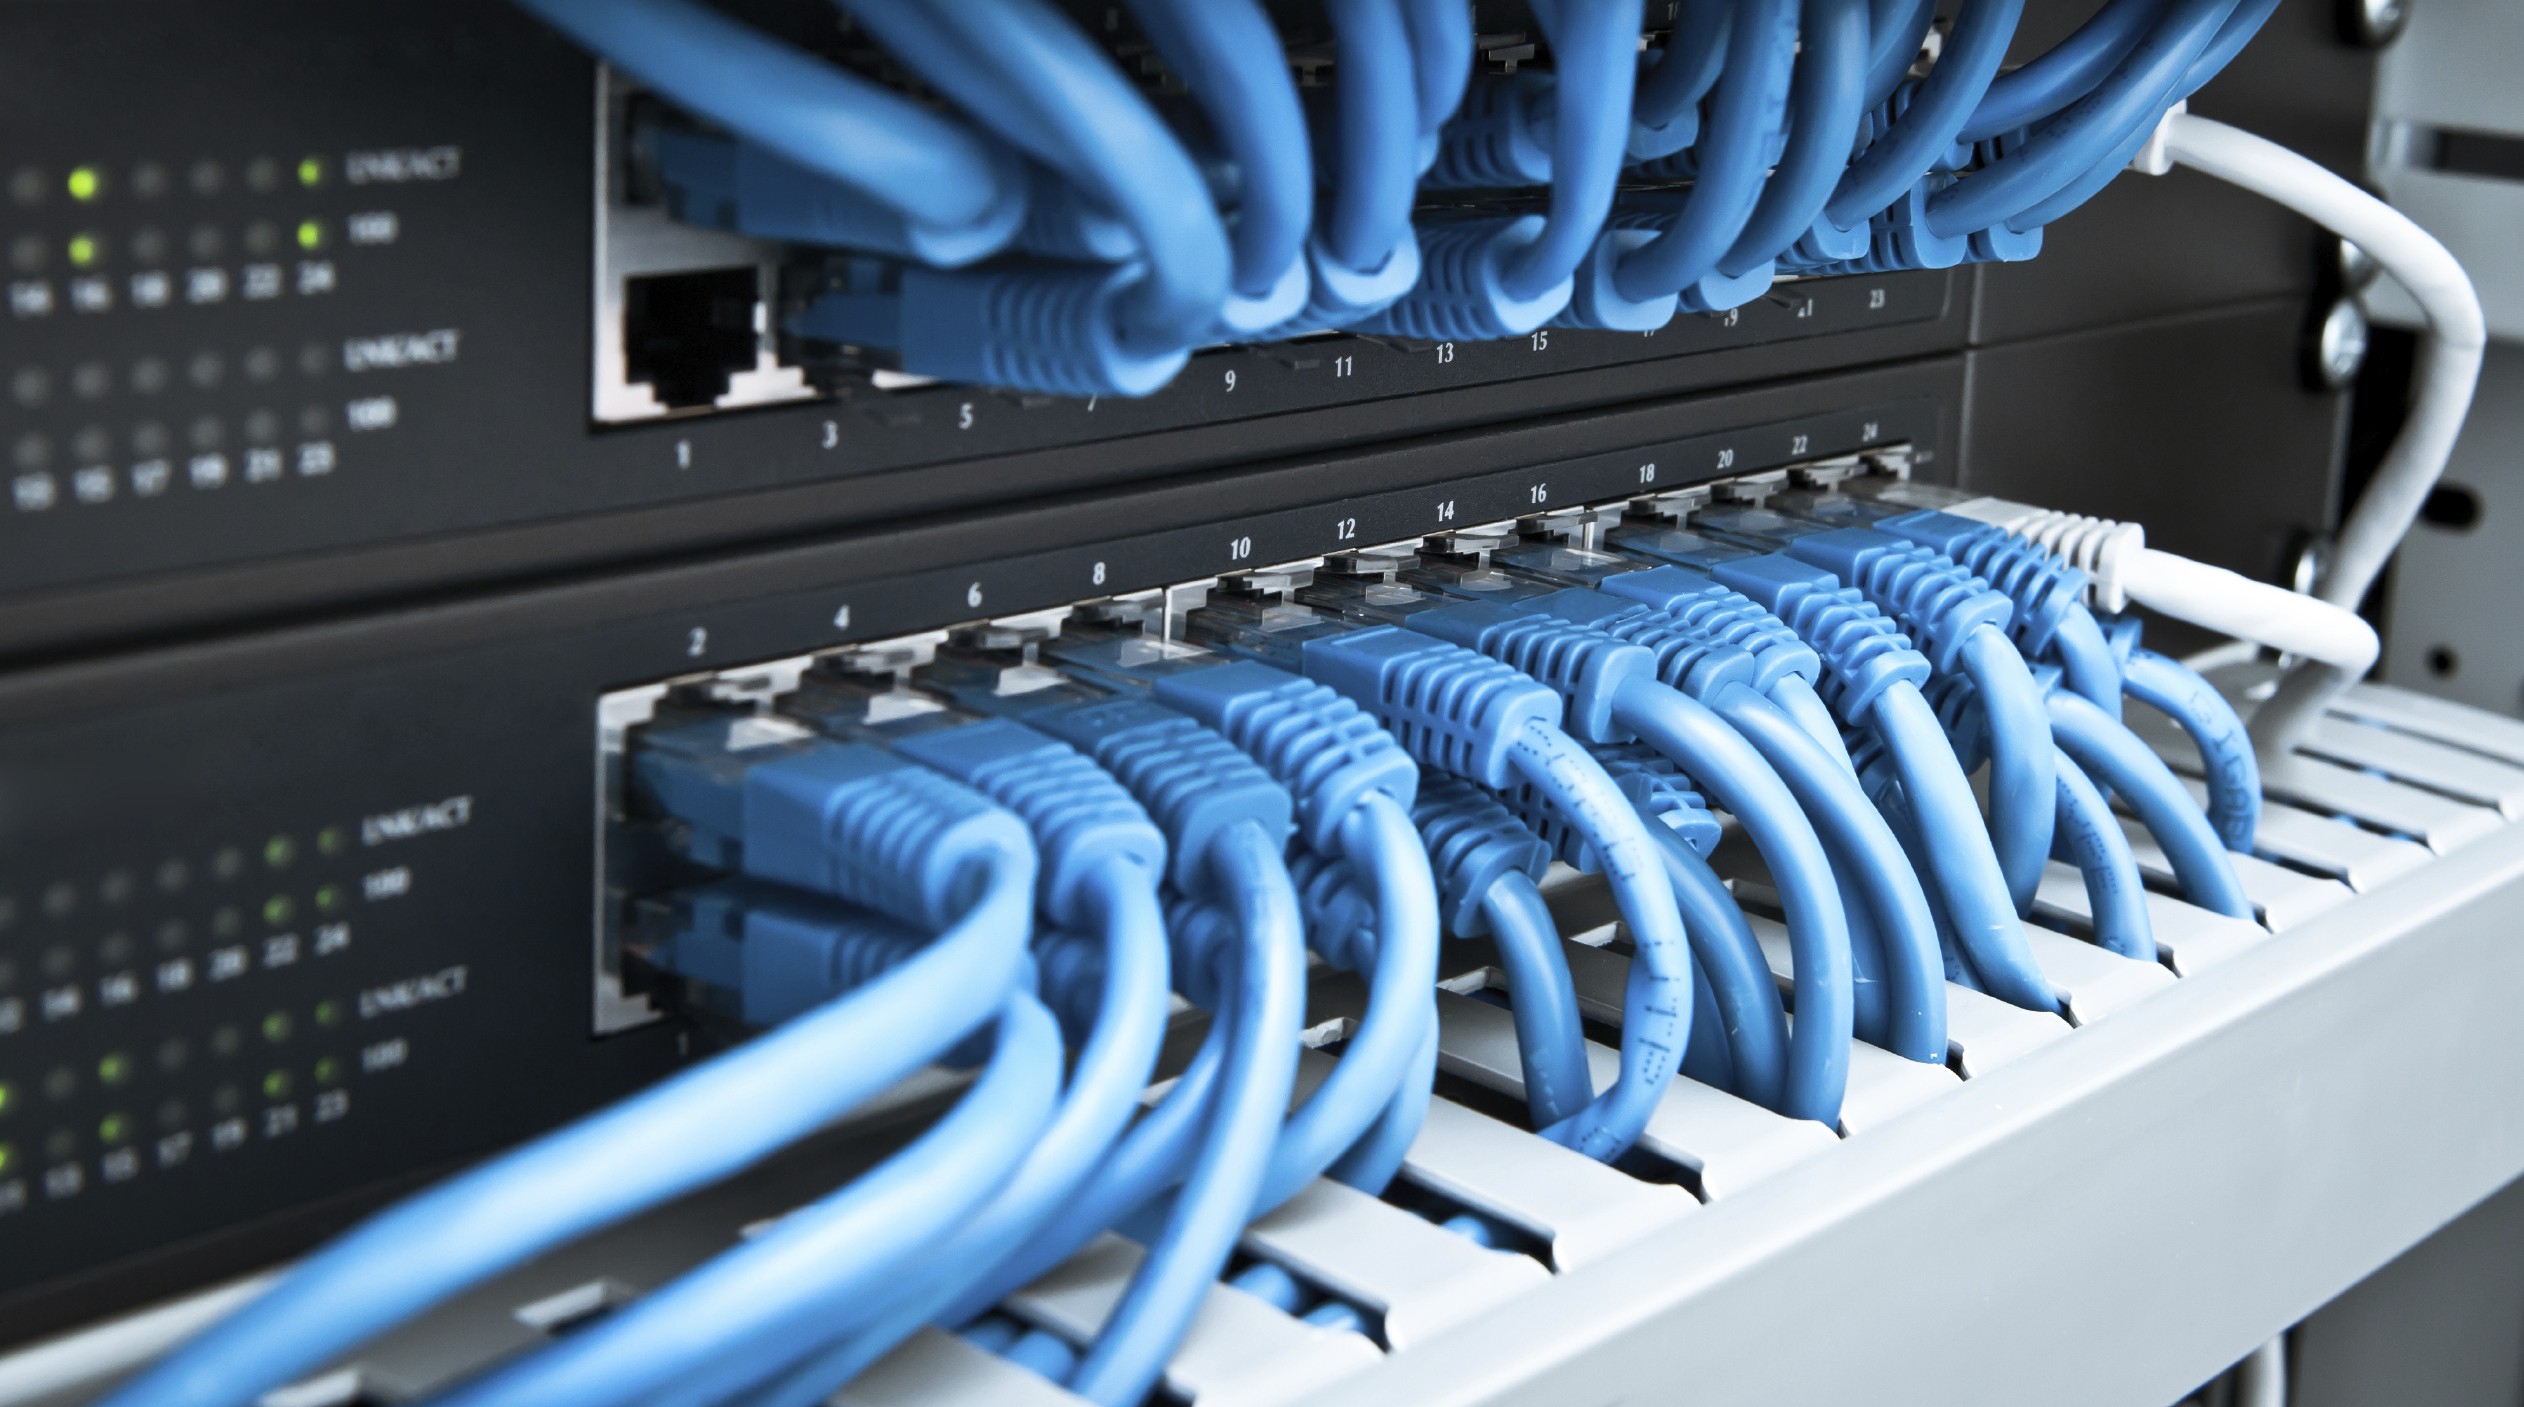 Coral Springs Florida Preferred Voice & Data Network Cabling Provider